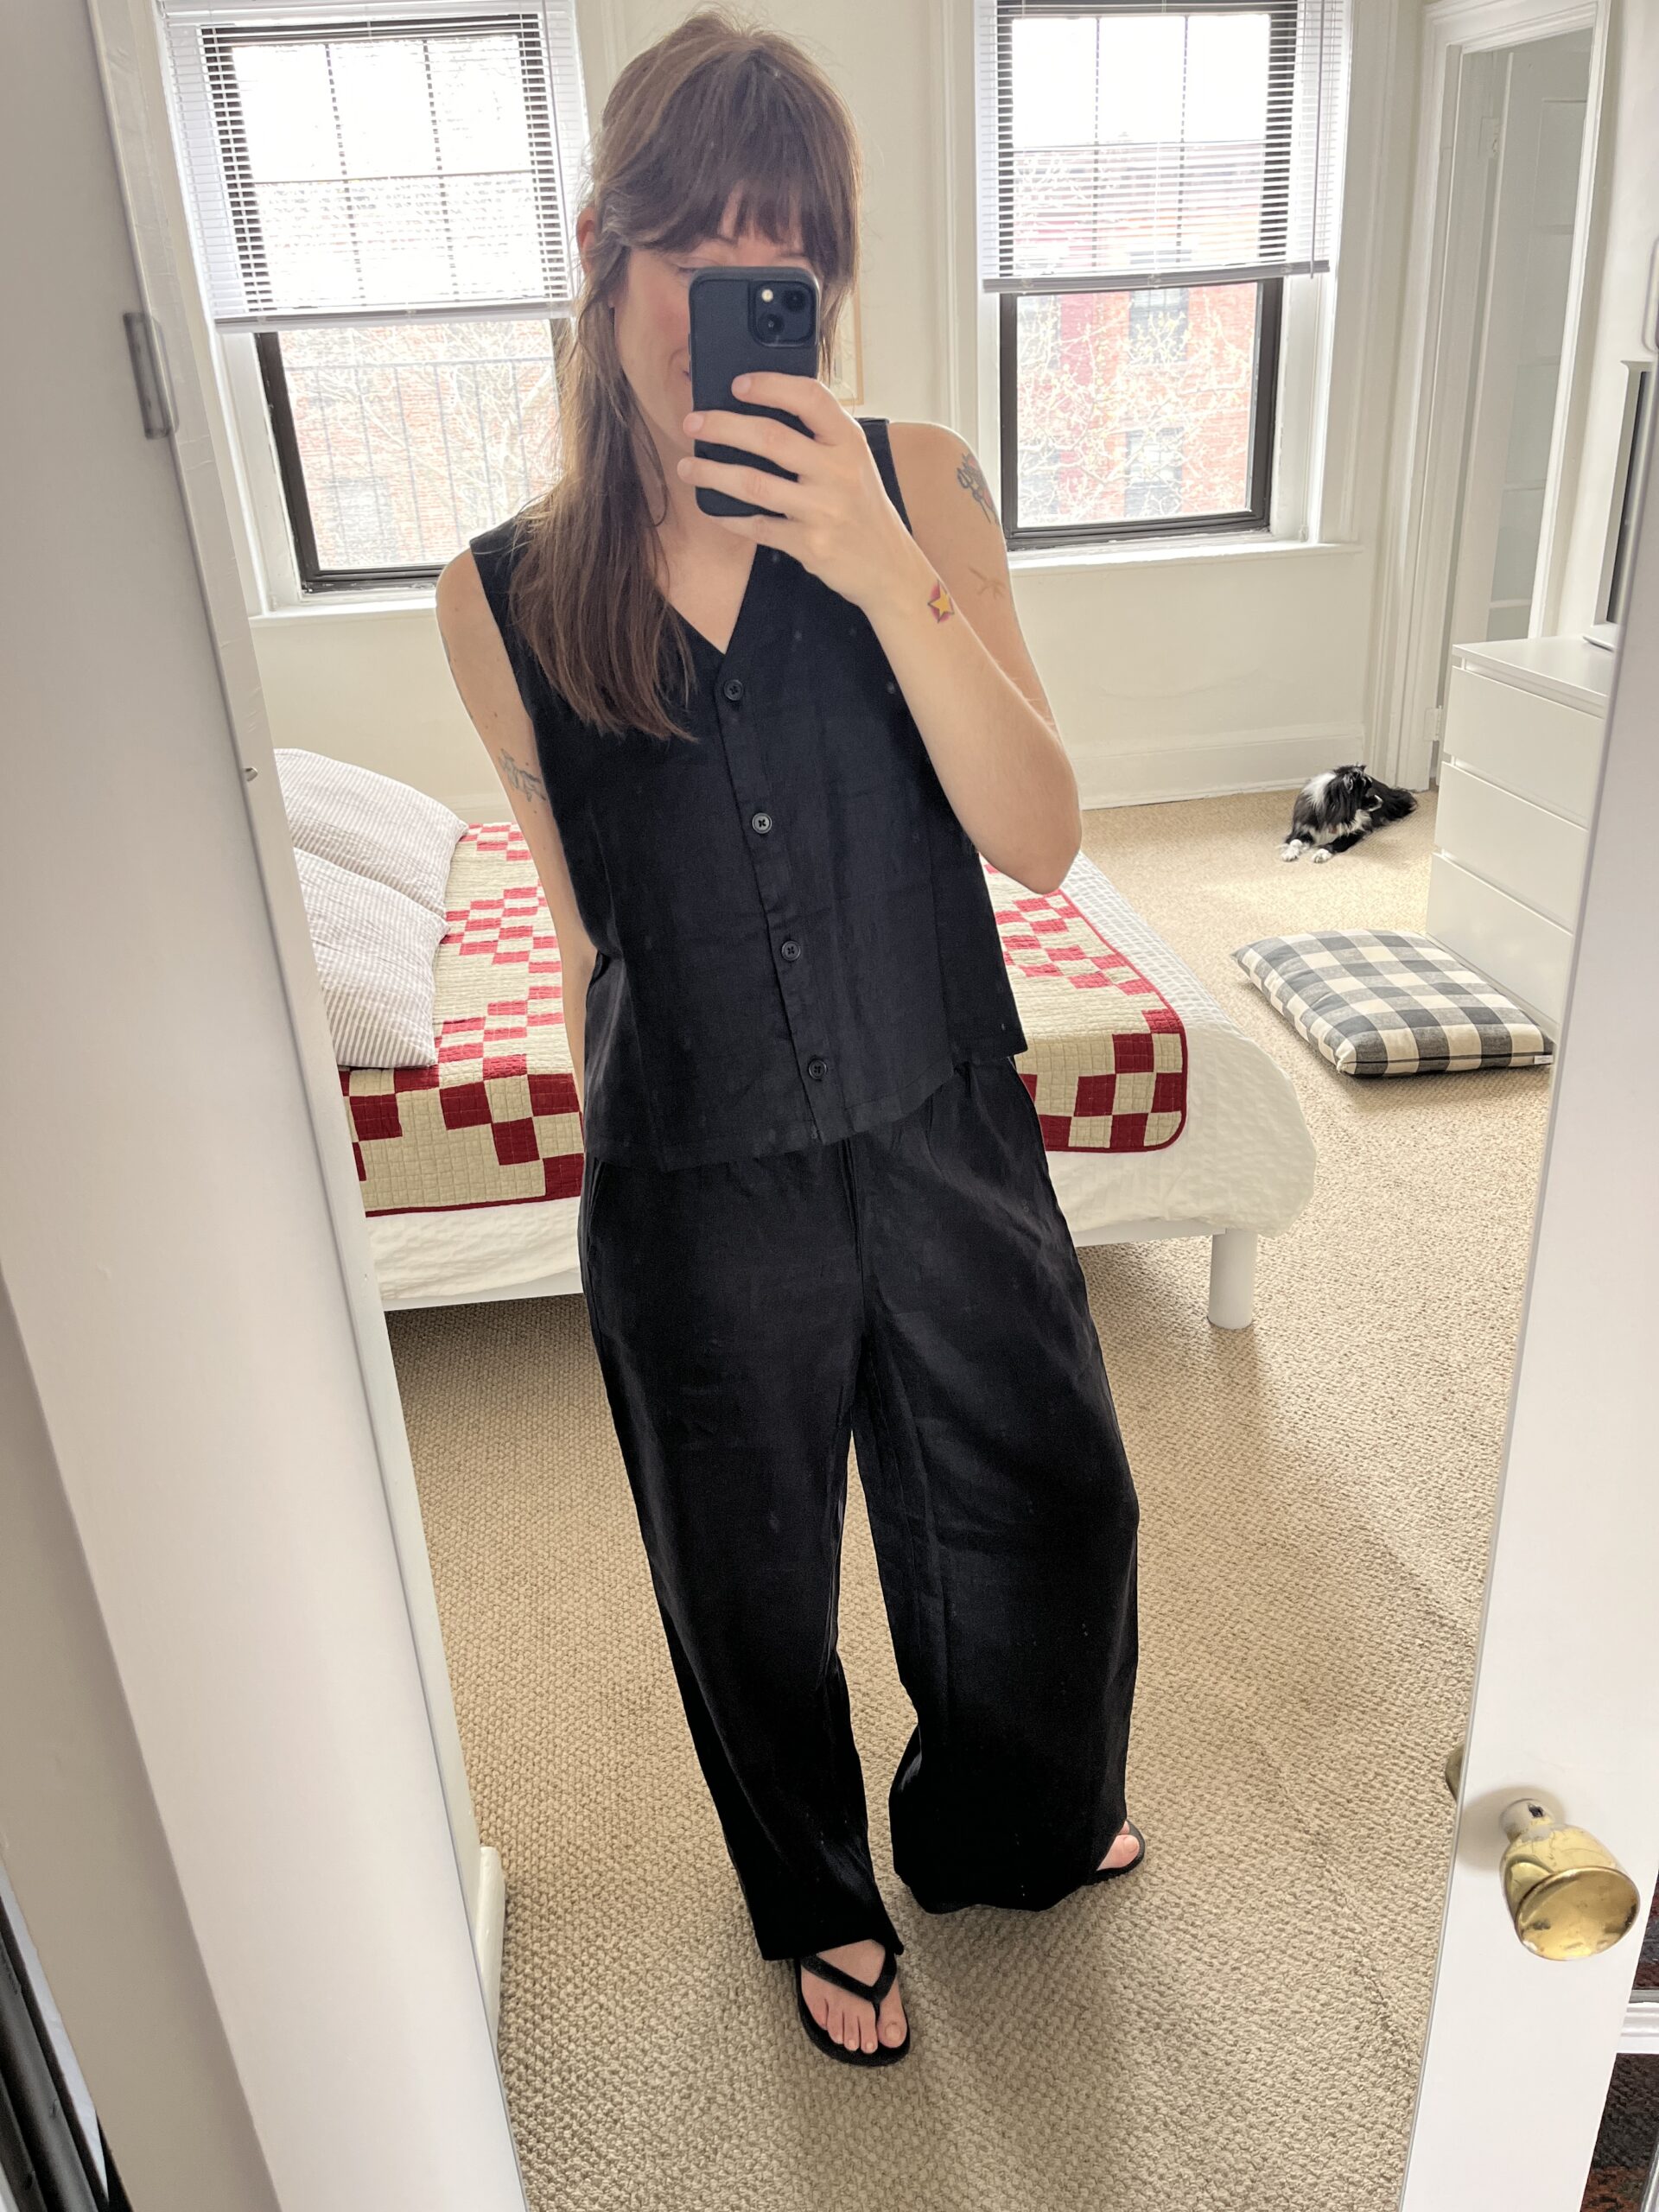 Woman in a black sleeveless jumpsuit taking a mirror selfie in a bedroom, with a dog lying on a bed in the background.